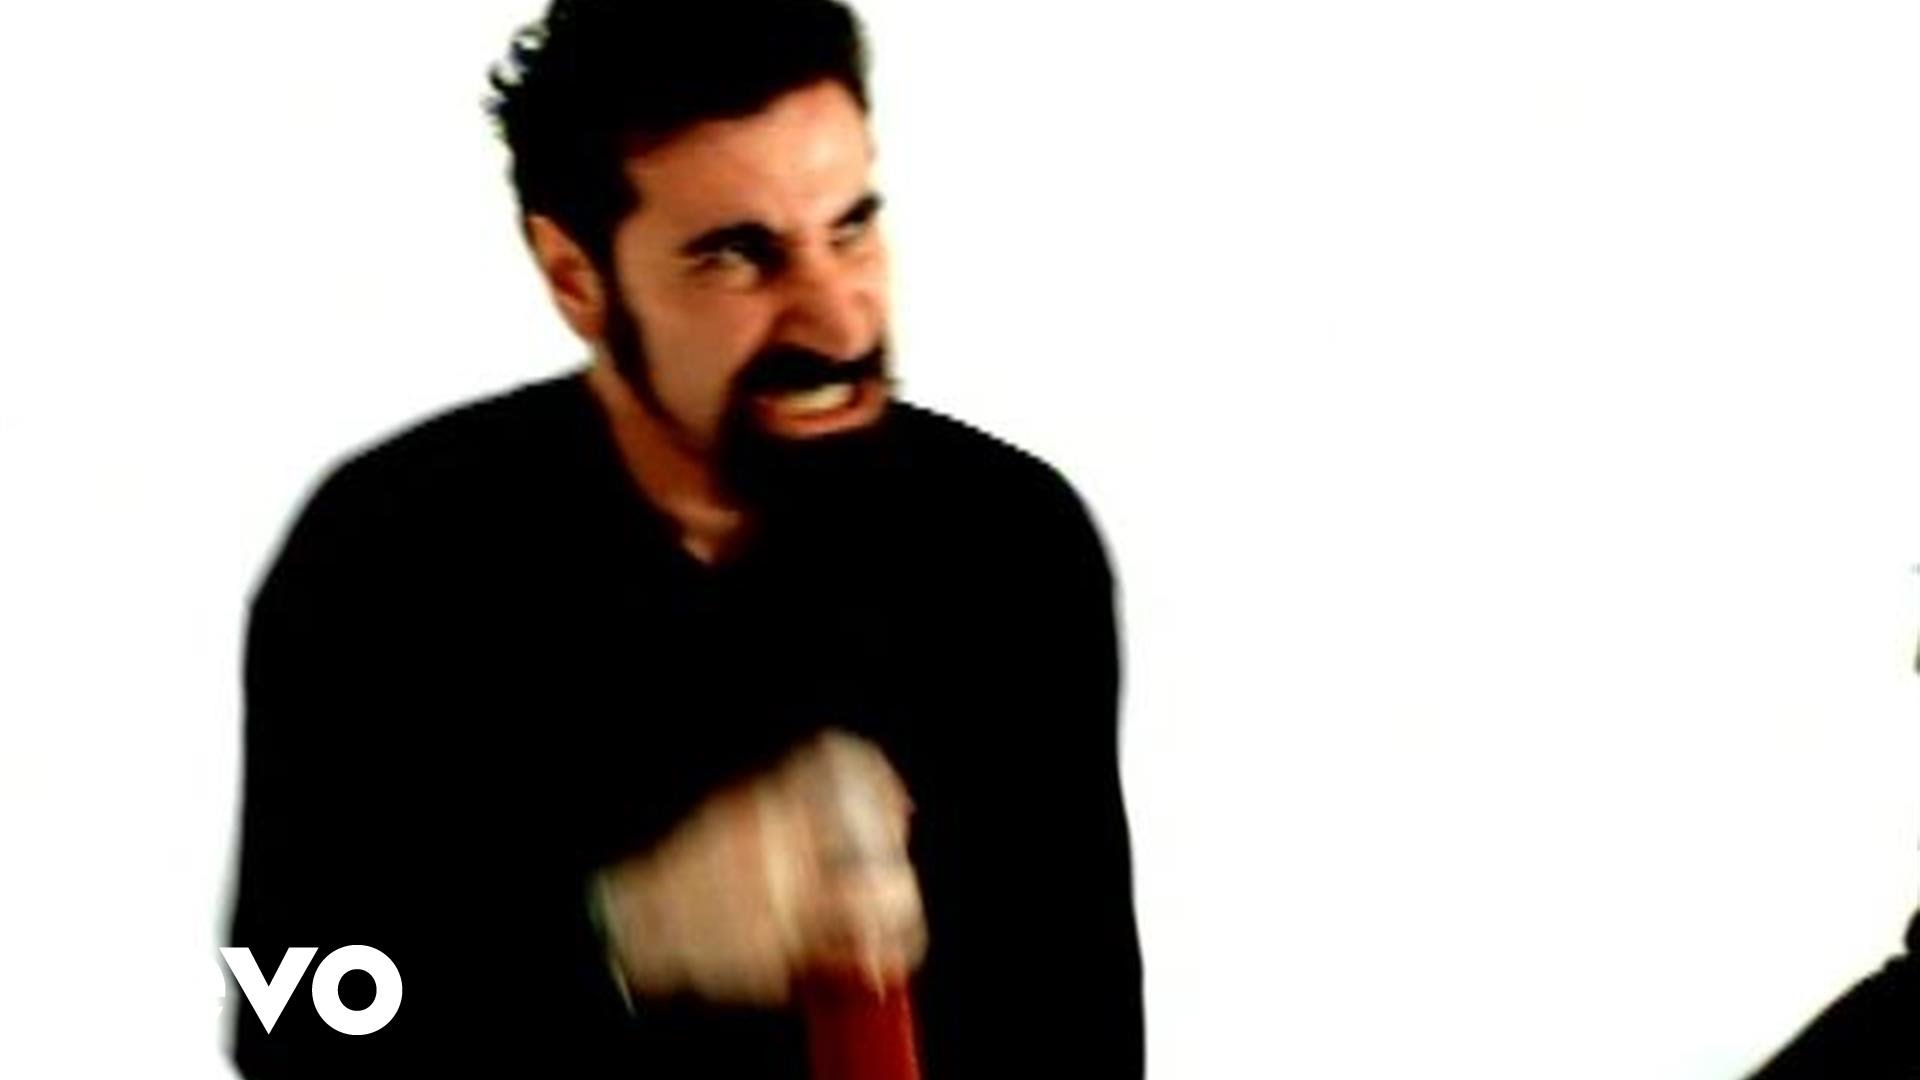 System Of A Down - Toxicity - YouTube